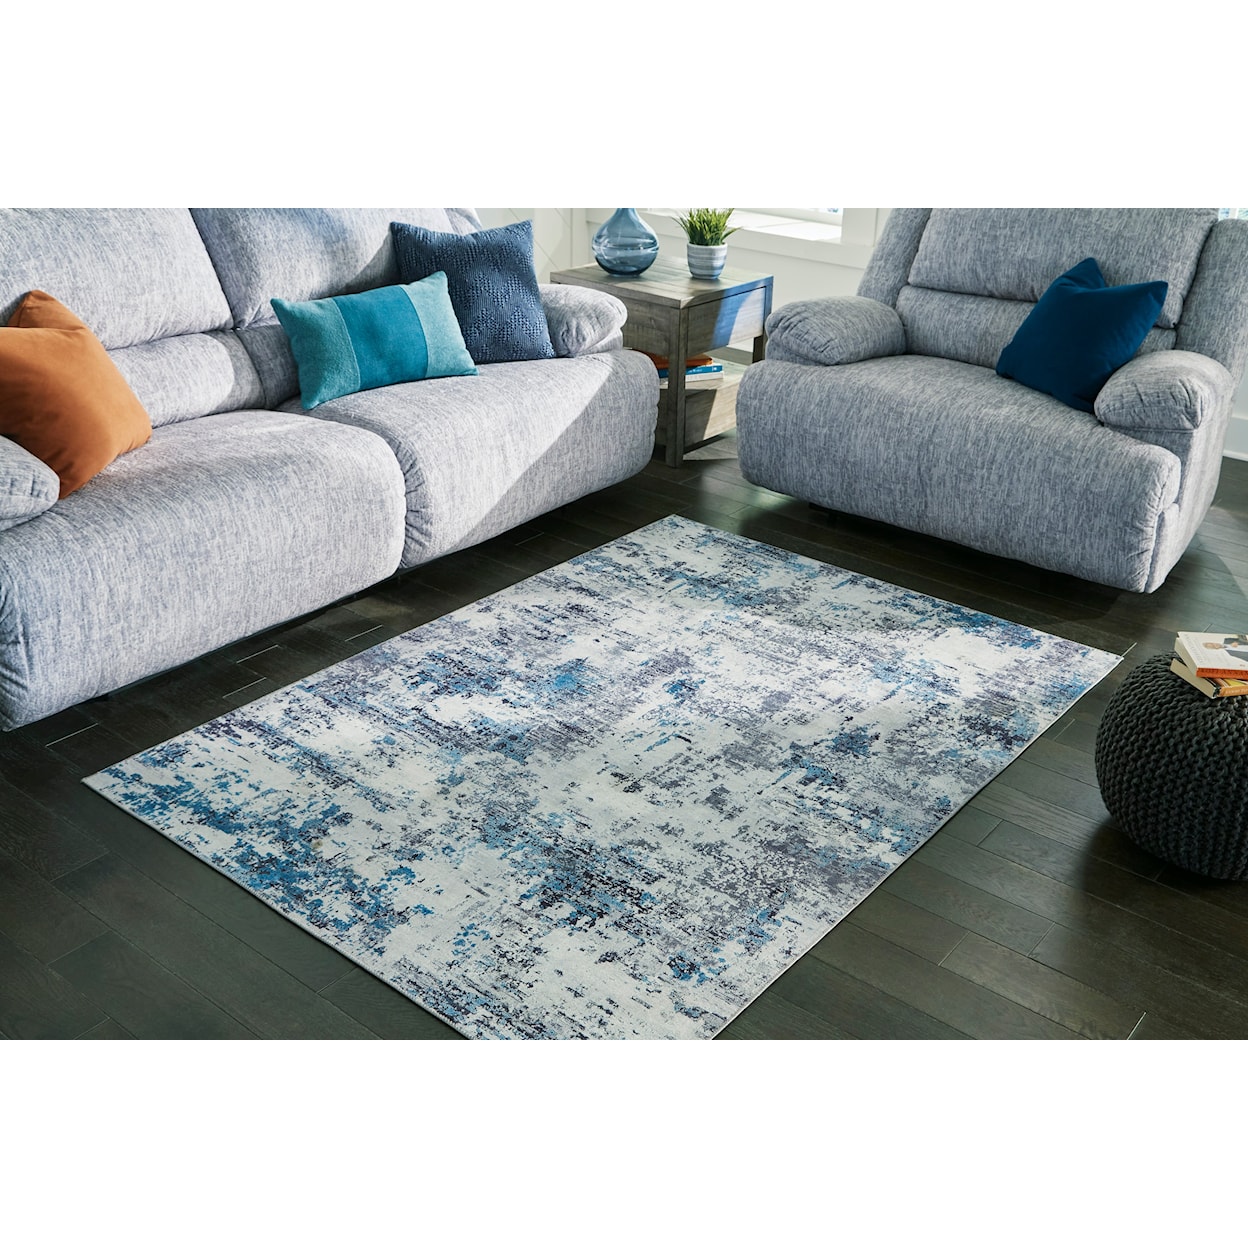 Signature Design by Ashley Contemporary Area Rugs Putmins 7'10" x 10' Rug